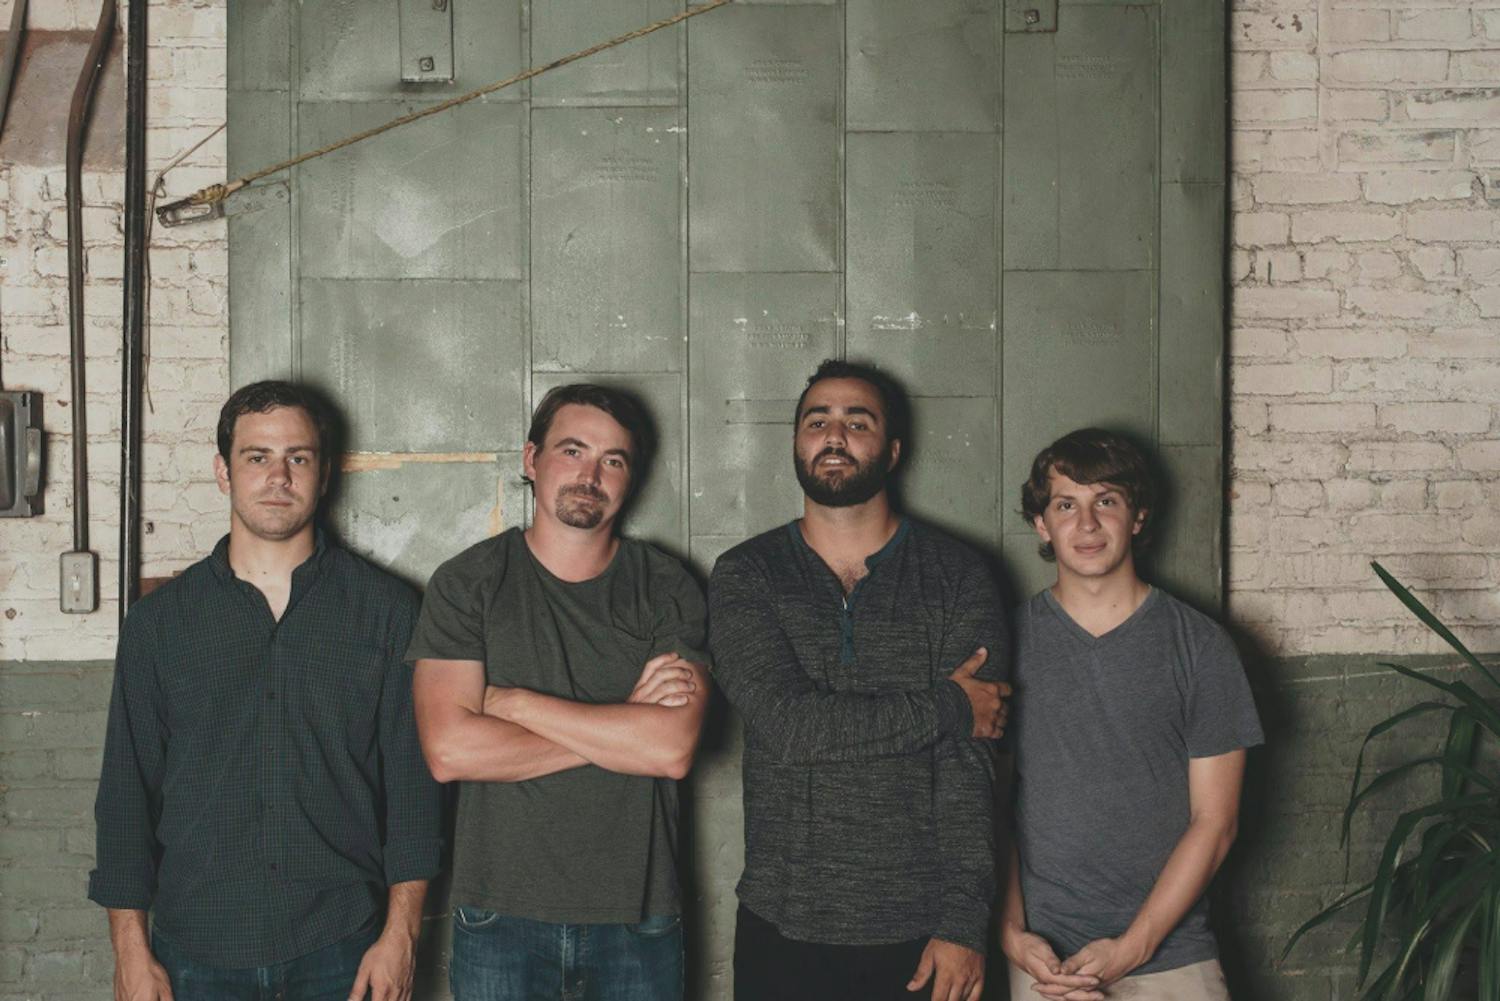 Members of the indie rock band Prawn are pictured above. They along with bands Dikembe, Caravela and Alumine are set to take the stage at the downtown venue Loosey’s on Friday night. 